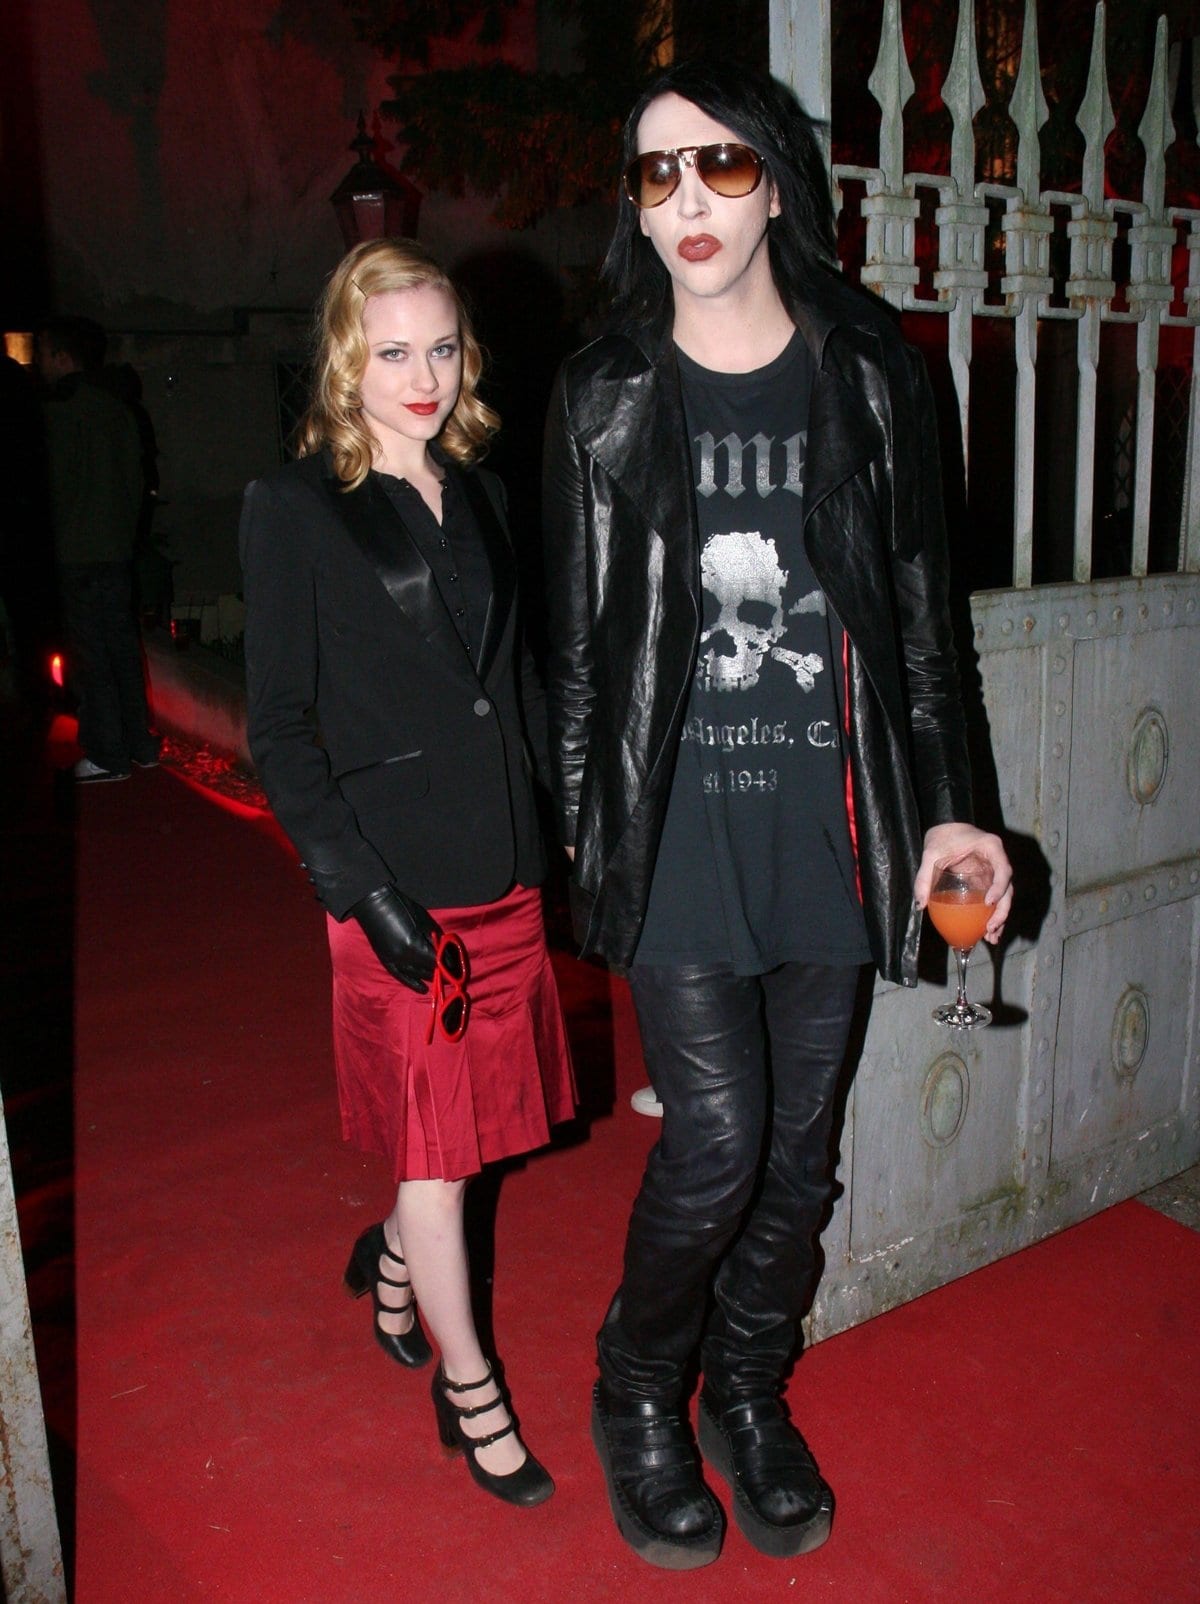 Marilyn Manson and his girlfriend Evan Rachel Wood leaving a listening session of his new album "Eat Me, Drink Me" for the German press